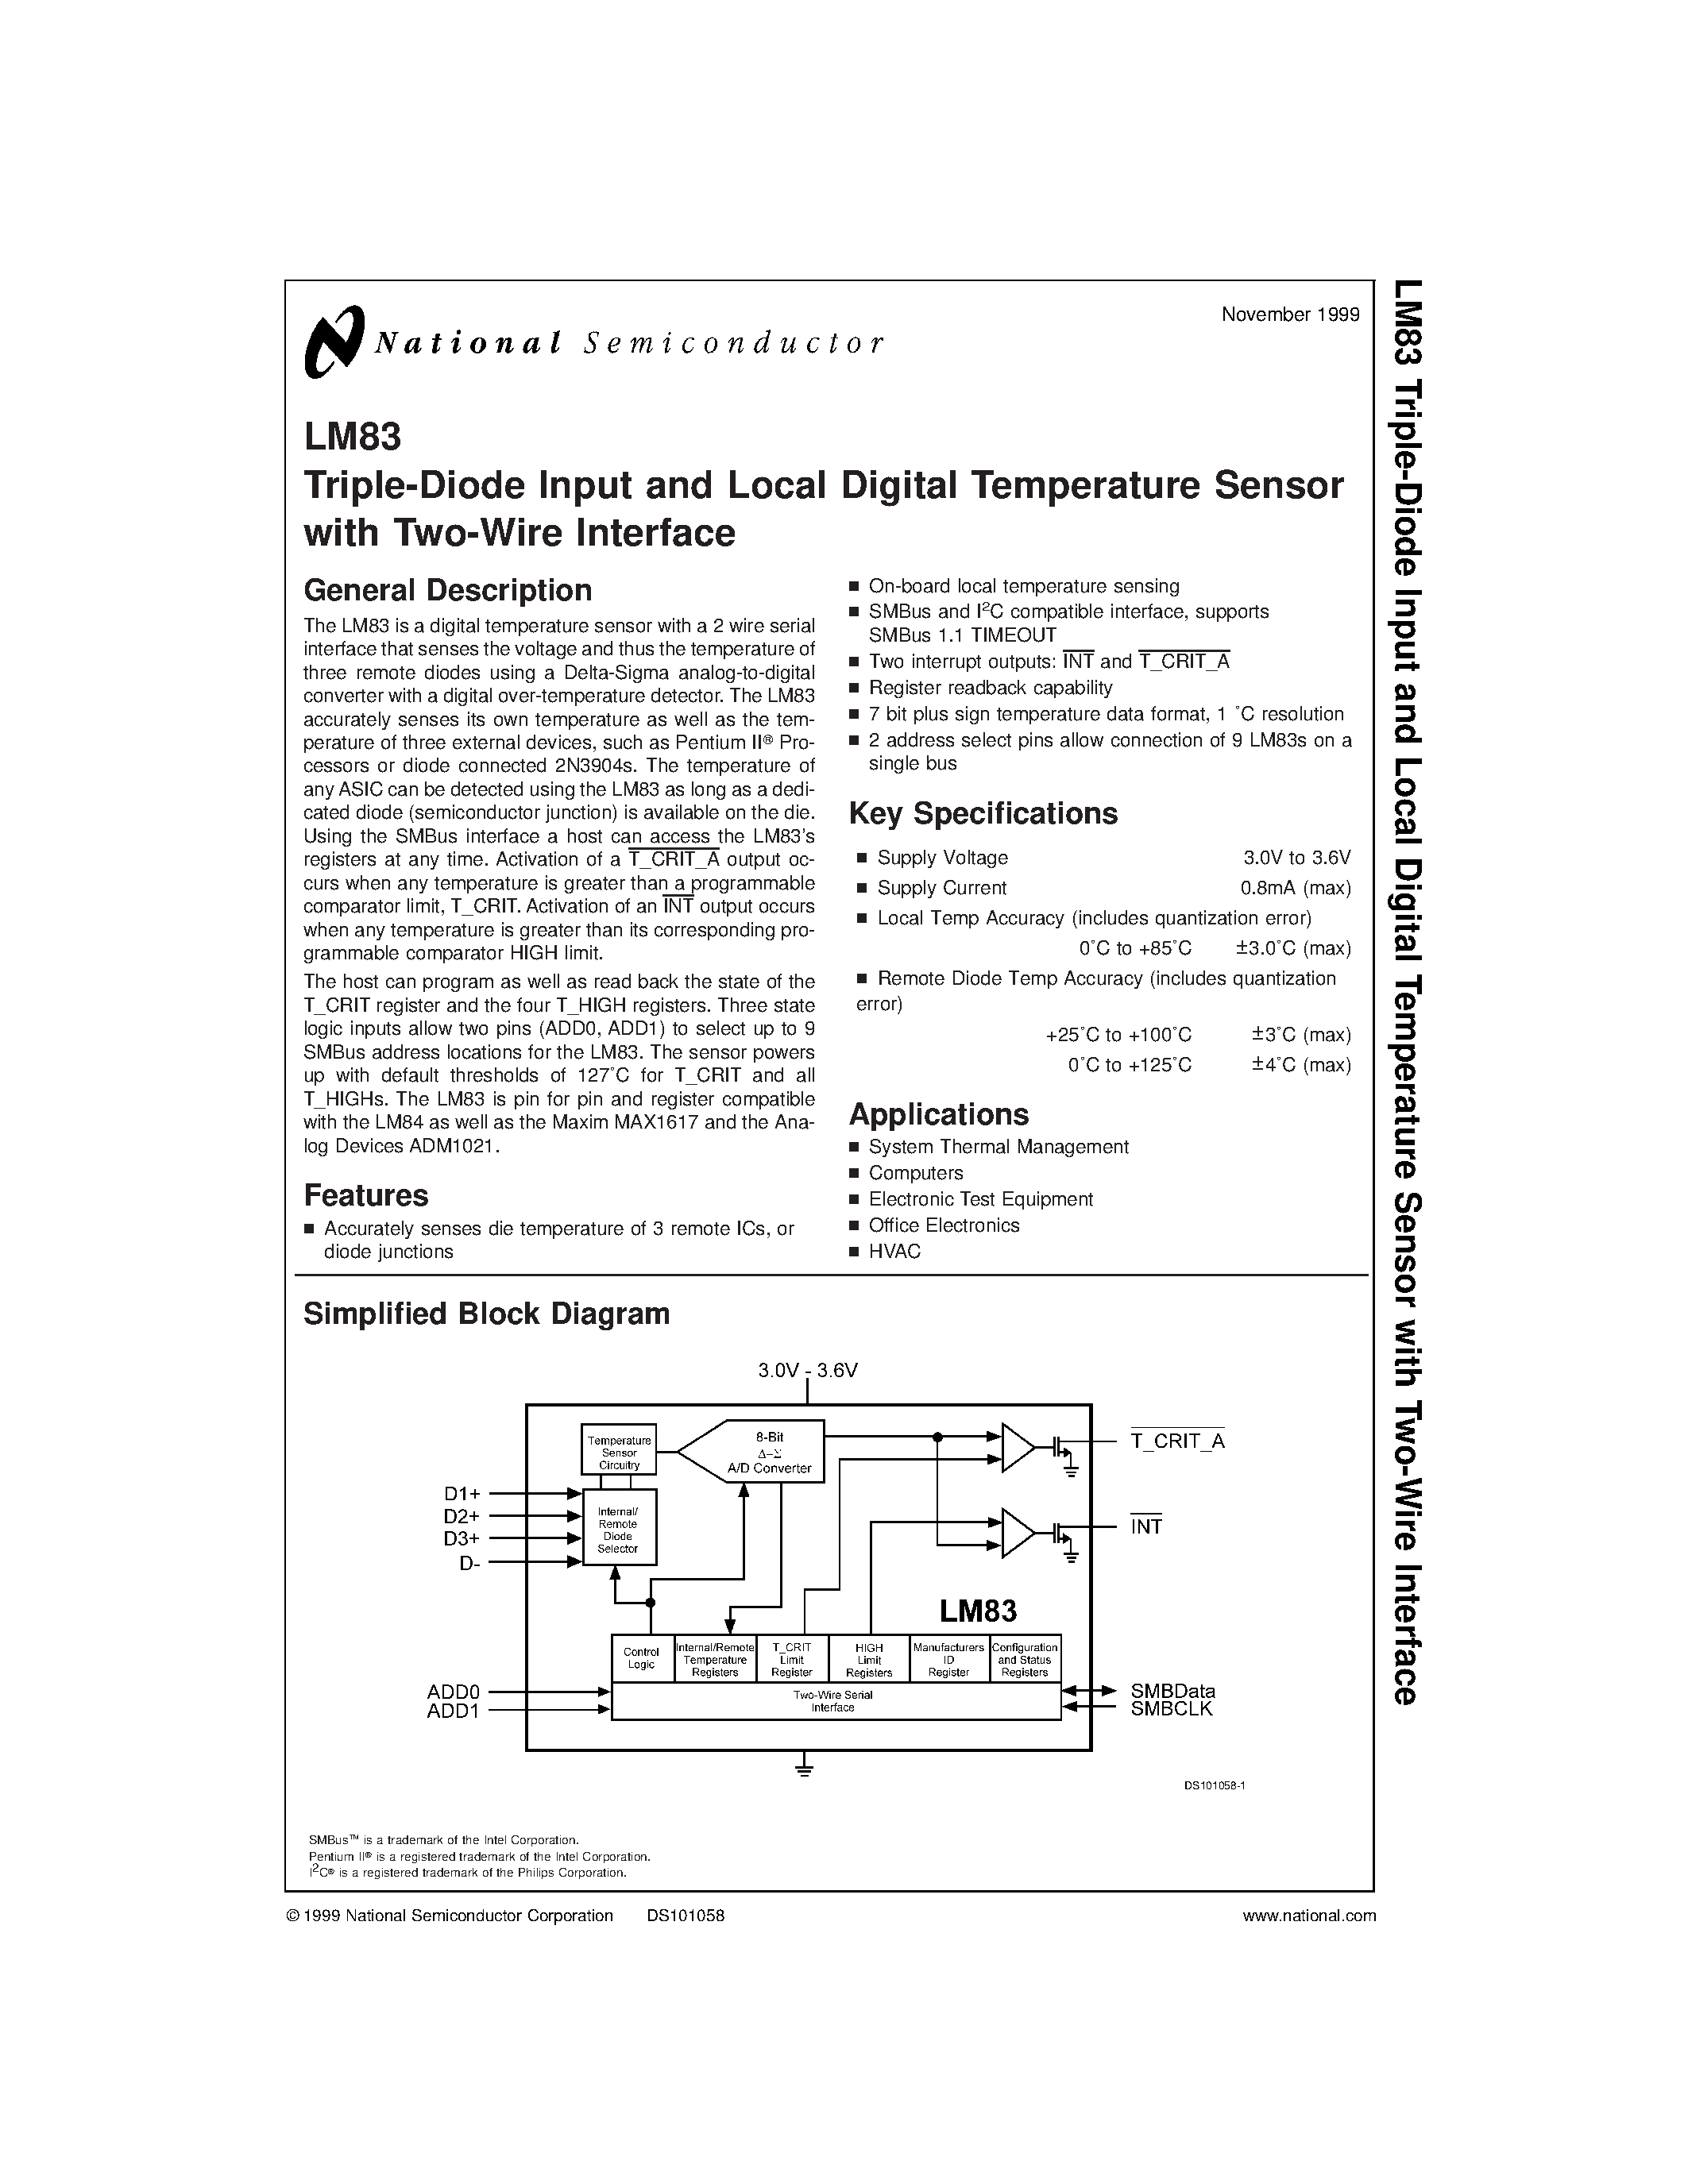 Datasheet LM83CIMQA - Triple-Diode Input and Local Digital Temperature Sensor with Two-Wire Interface page 1